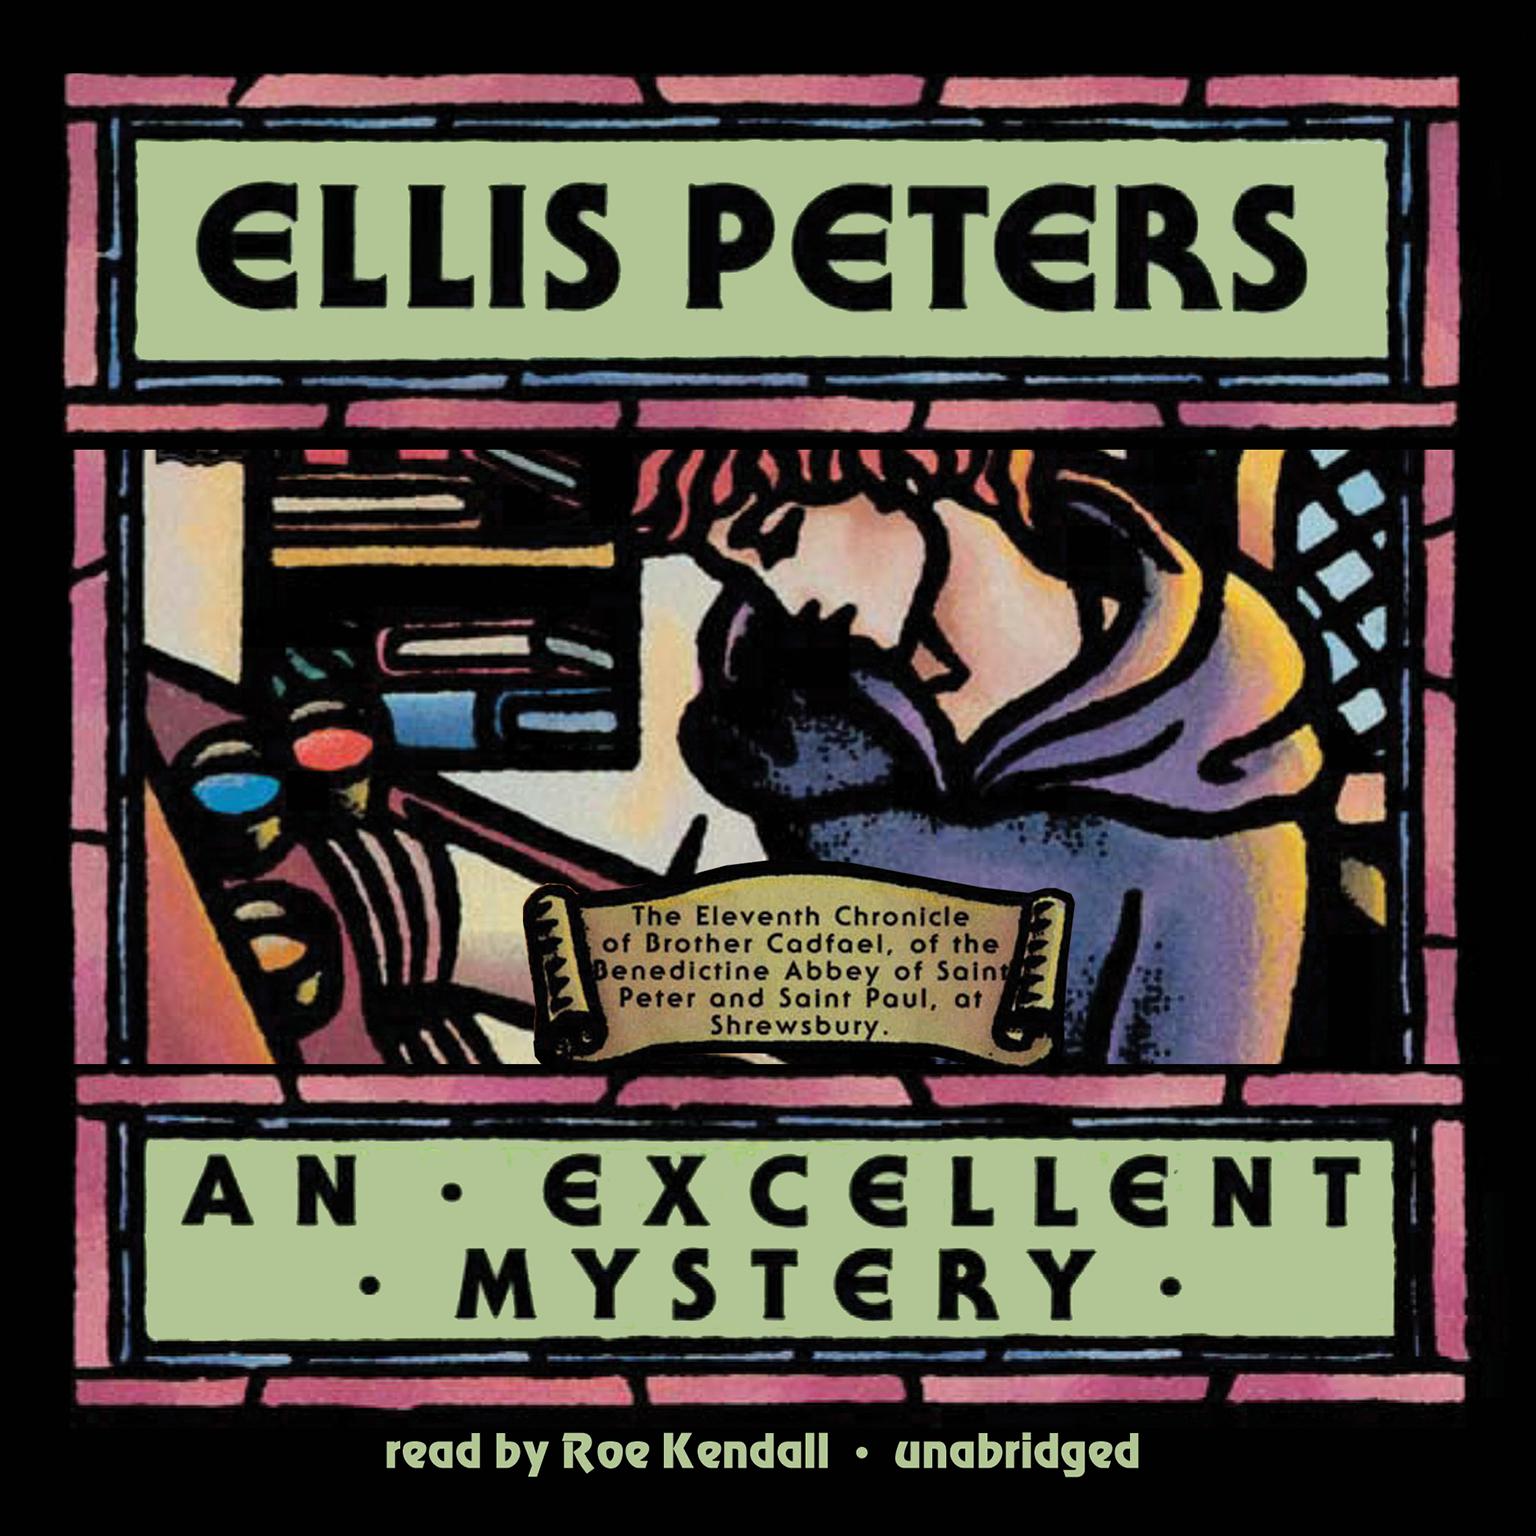 An Excellent Mystery: The Eleventh Chronicle of Brother Cadfael Audiobook, by Ellis Peters